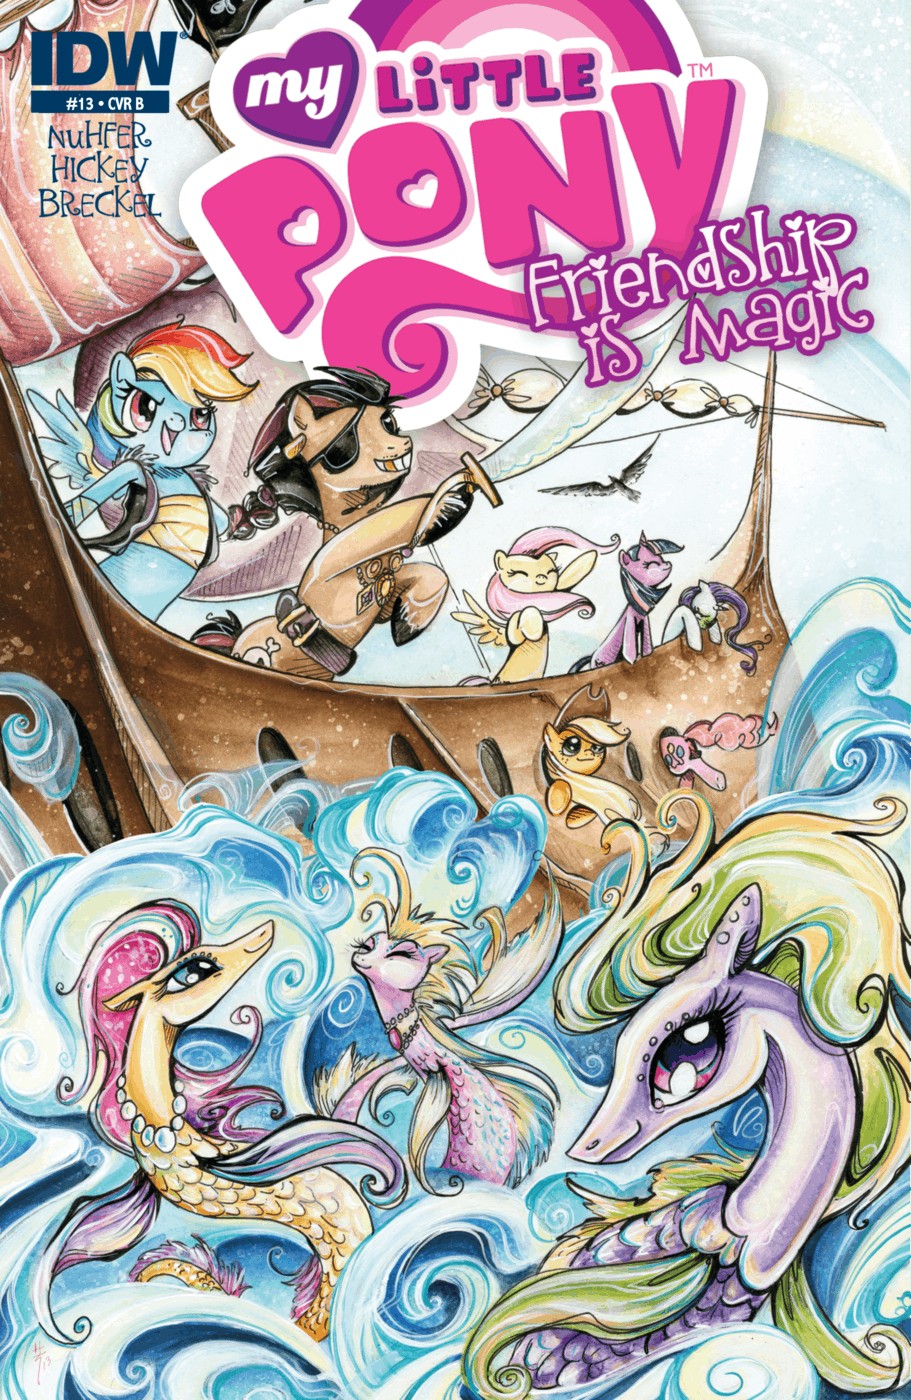 Read online My Little Pony: Friendship is Magic comic -  Issue #13 - 2